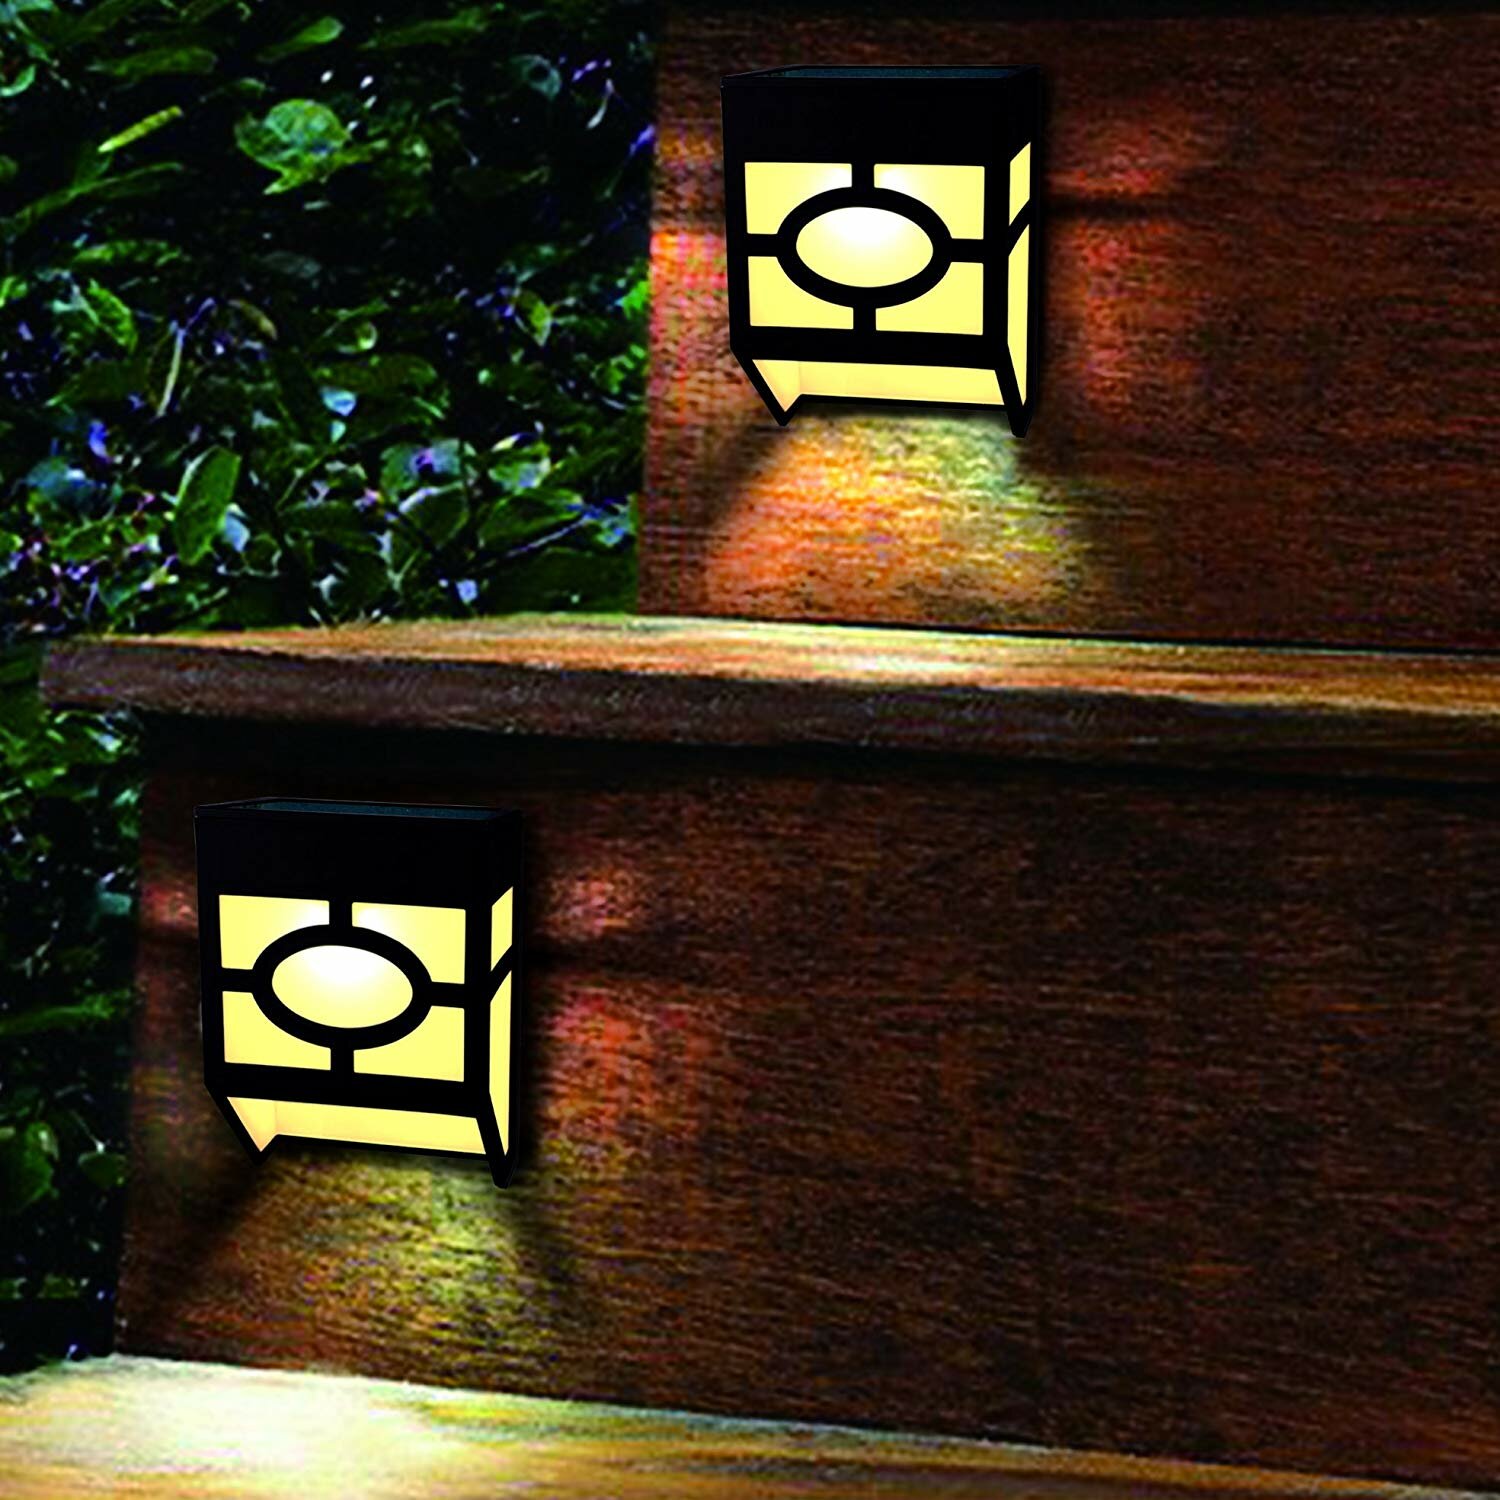 Solar Lights 4PCS MoKo Outdoor Waterproof Solar Powered Security Lamp Driveway White Yard Garden Wall-Mounted 6 LED Decorative Step Lights with Auto Sensor for Pathway Patio Deck